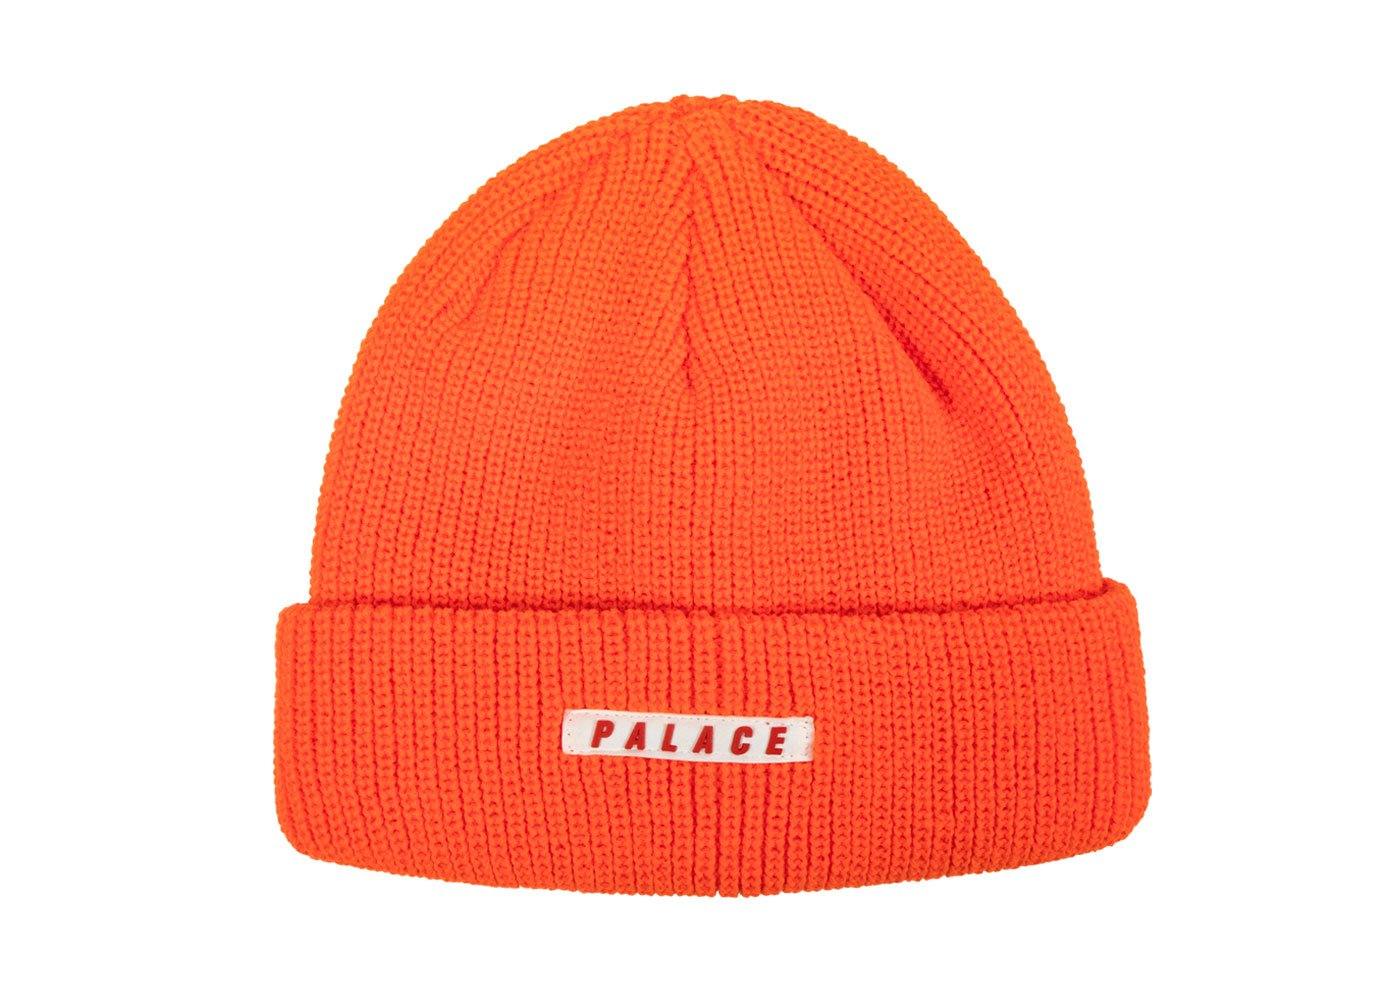 PALACE SKATEBOARDS SPACED BEANIE